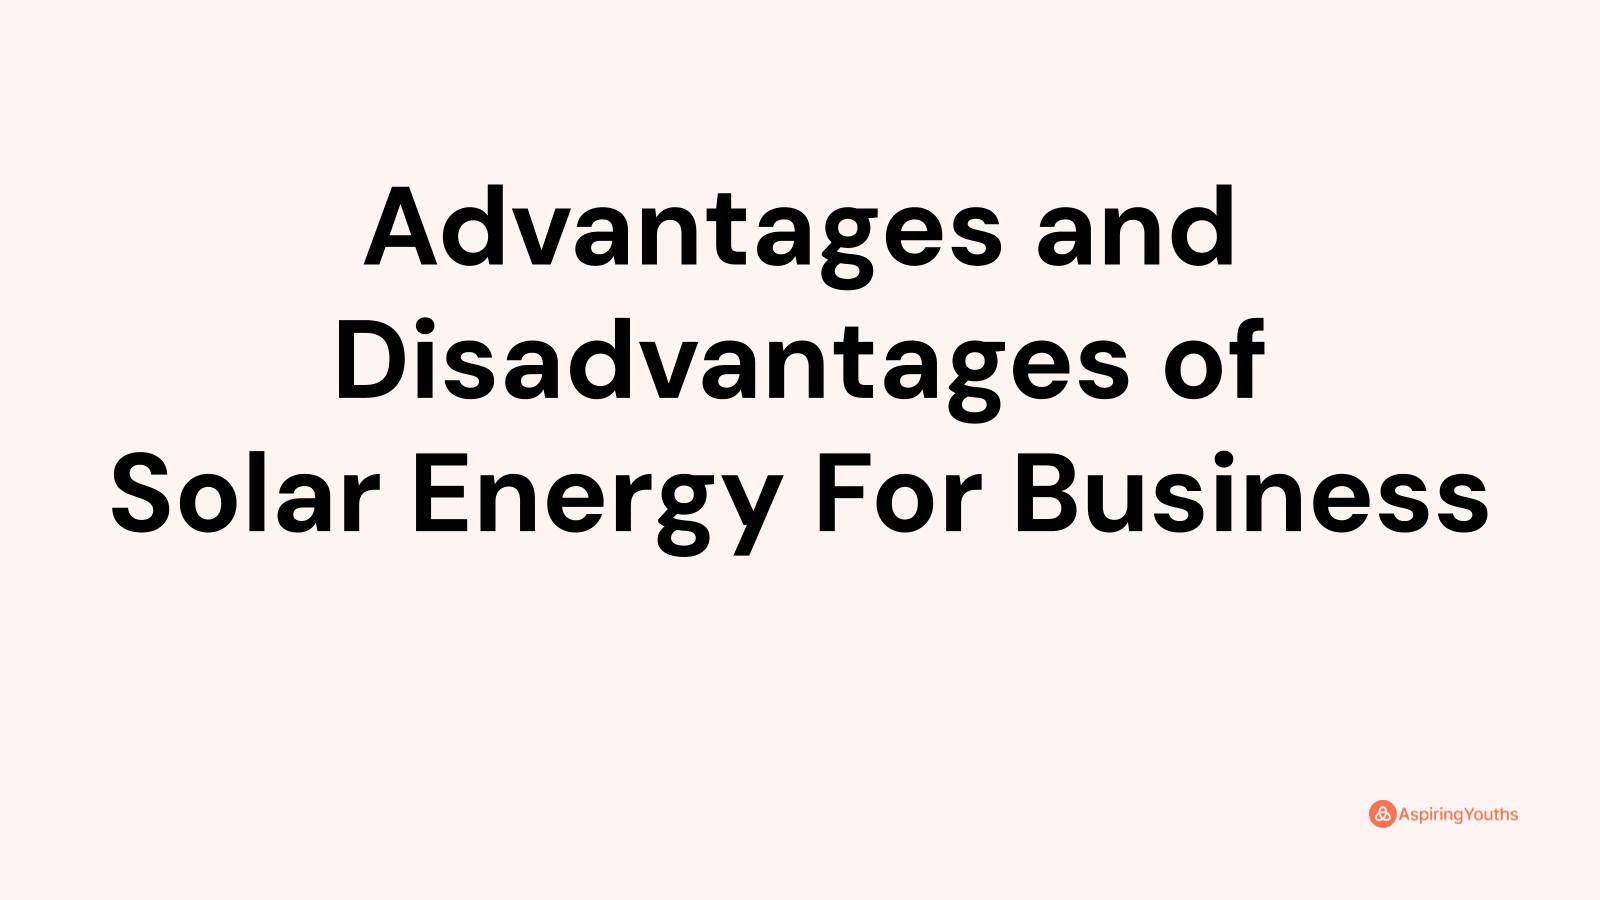 Advantages and disadvantages of Solar Energy For Business